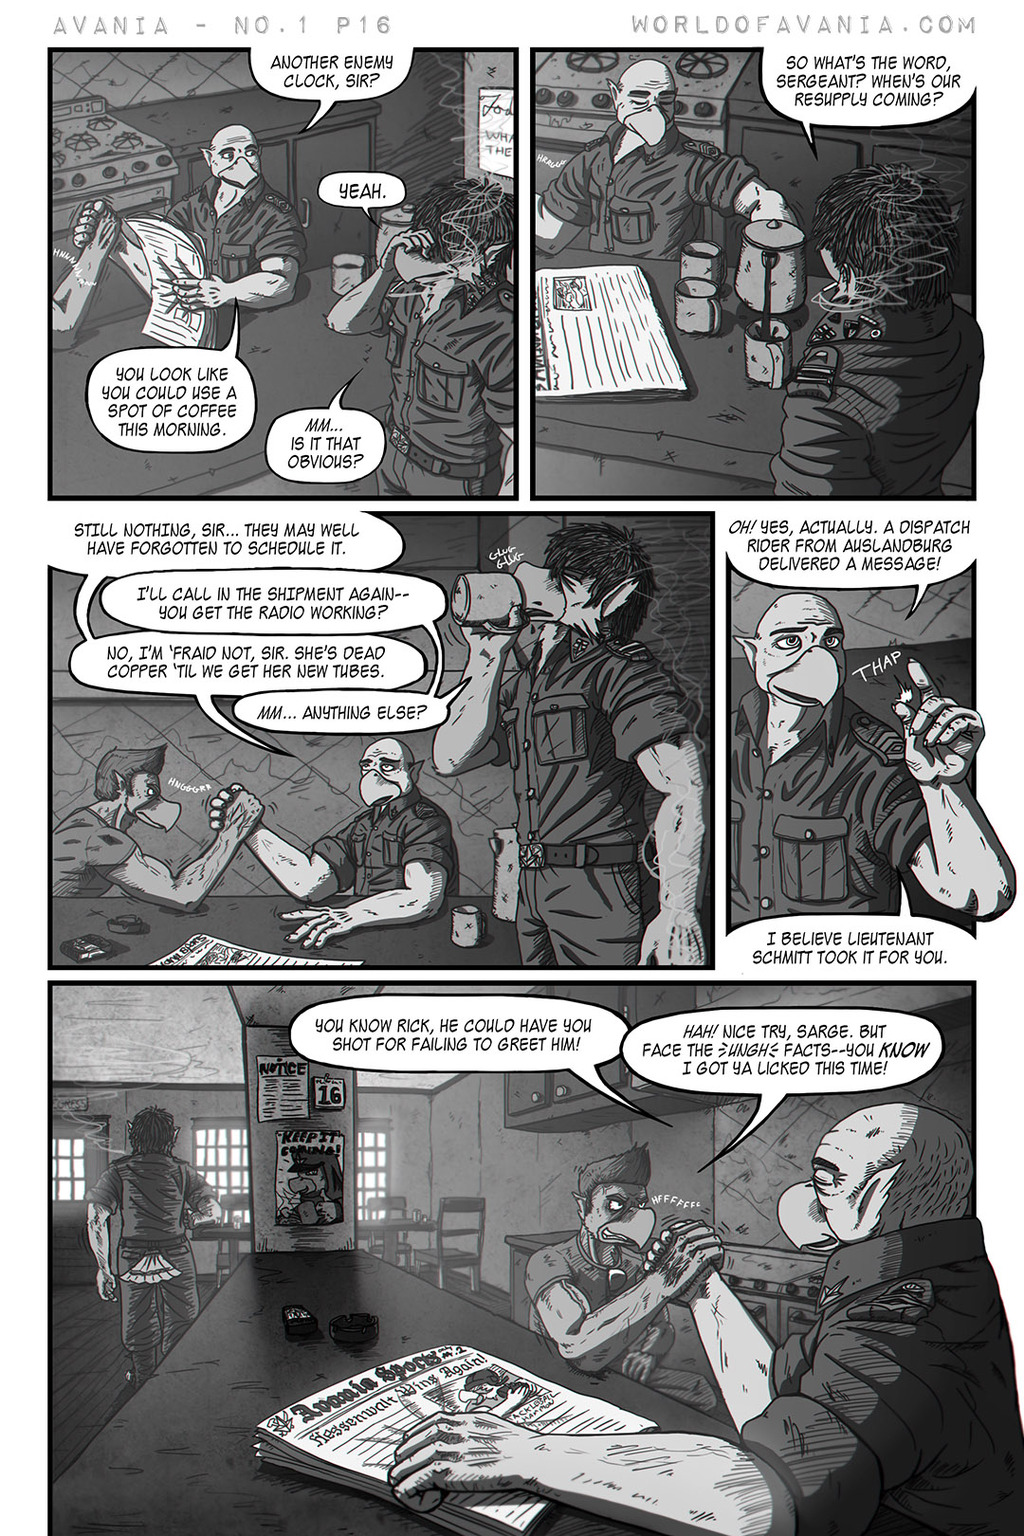 Avania Comic - Issue No.1, Page 16